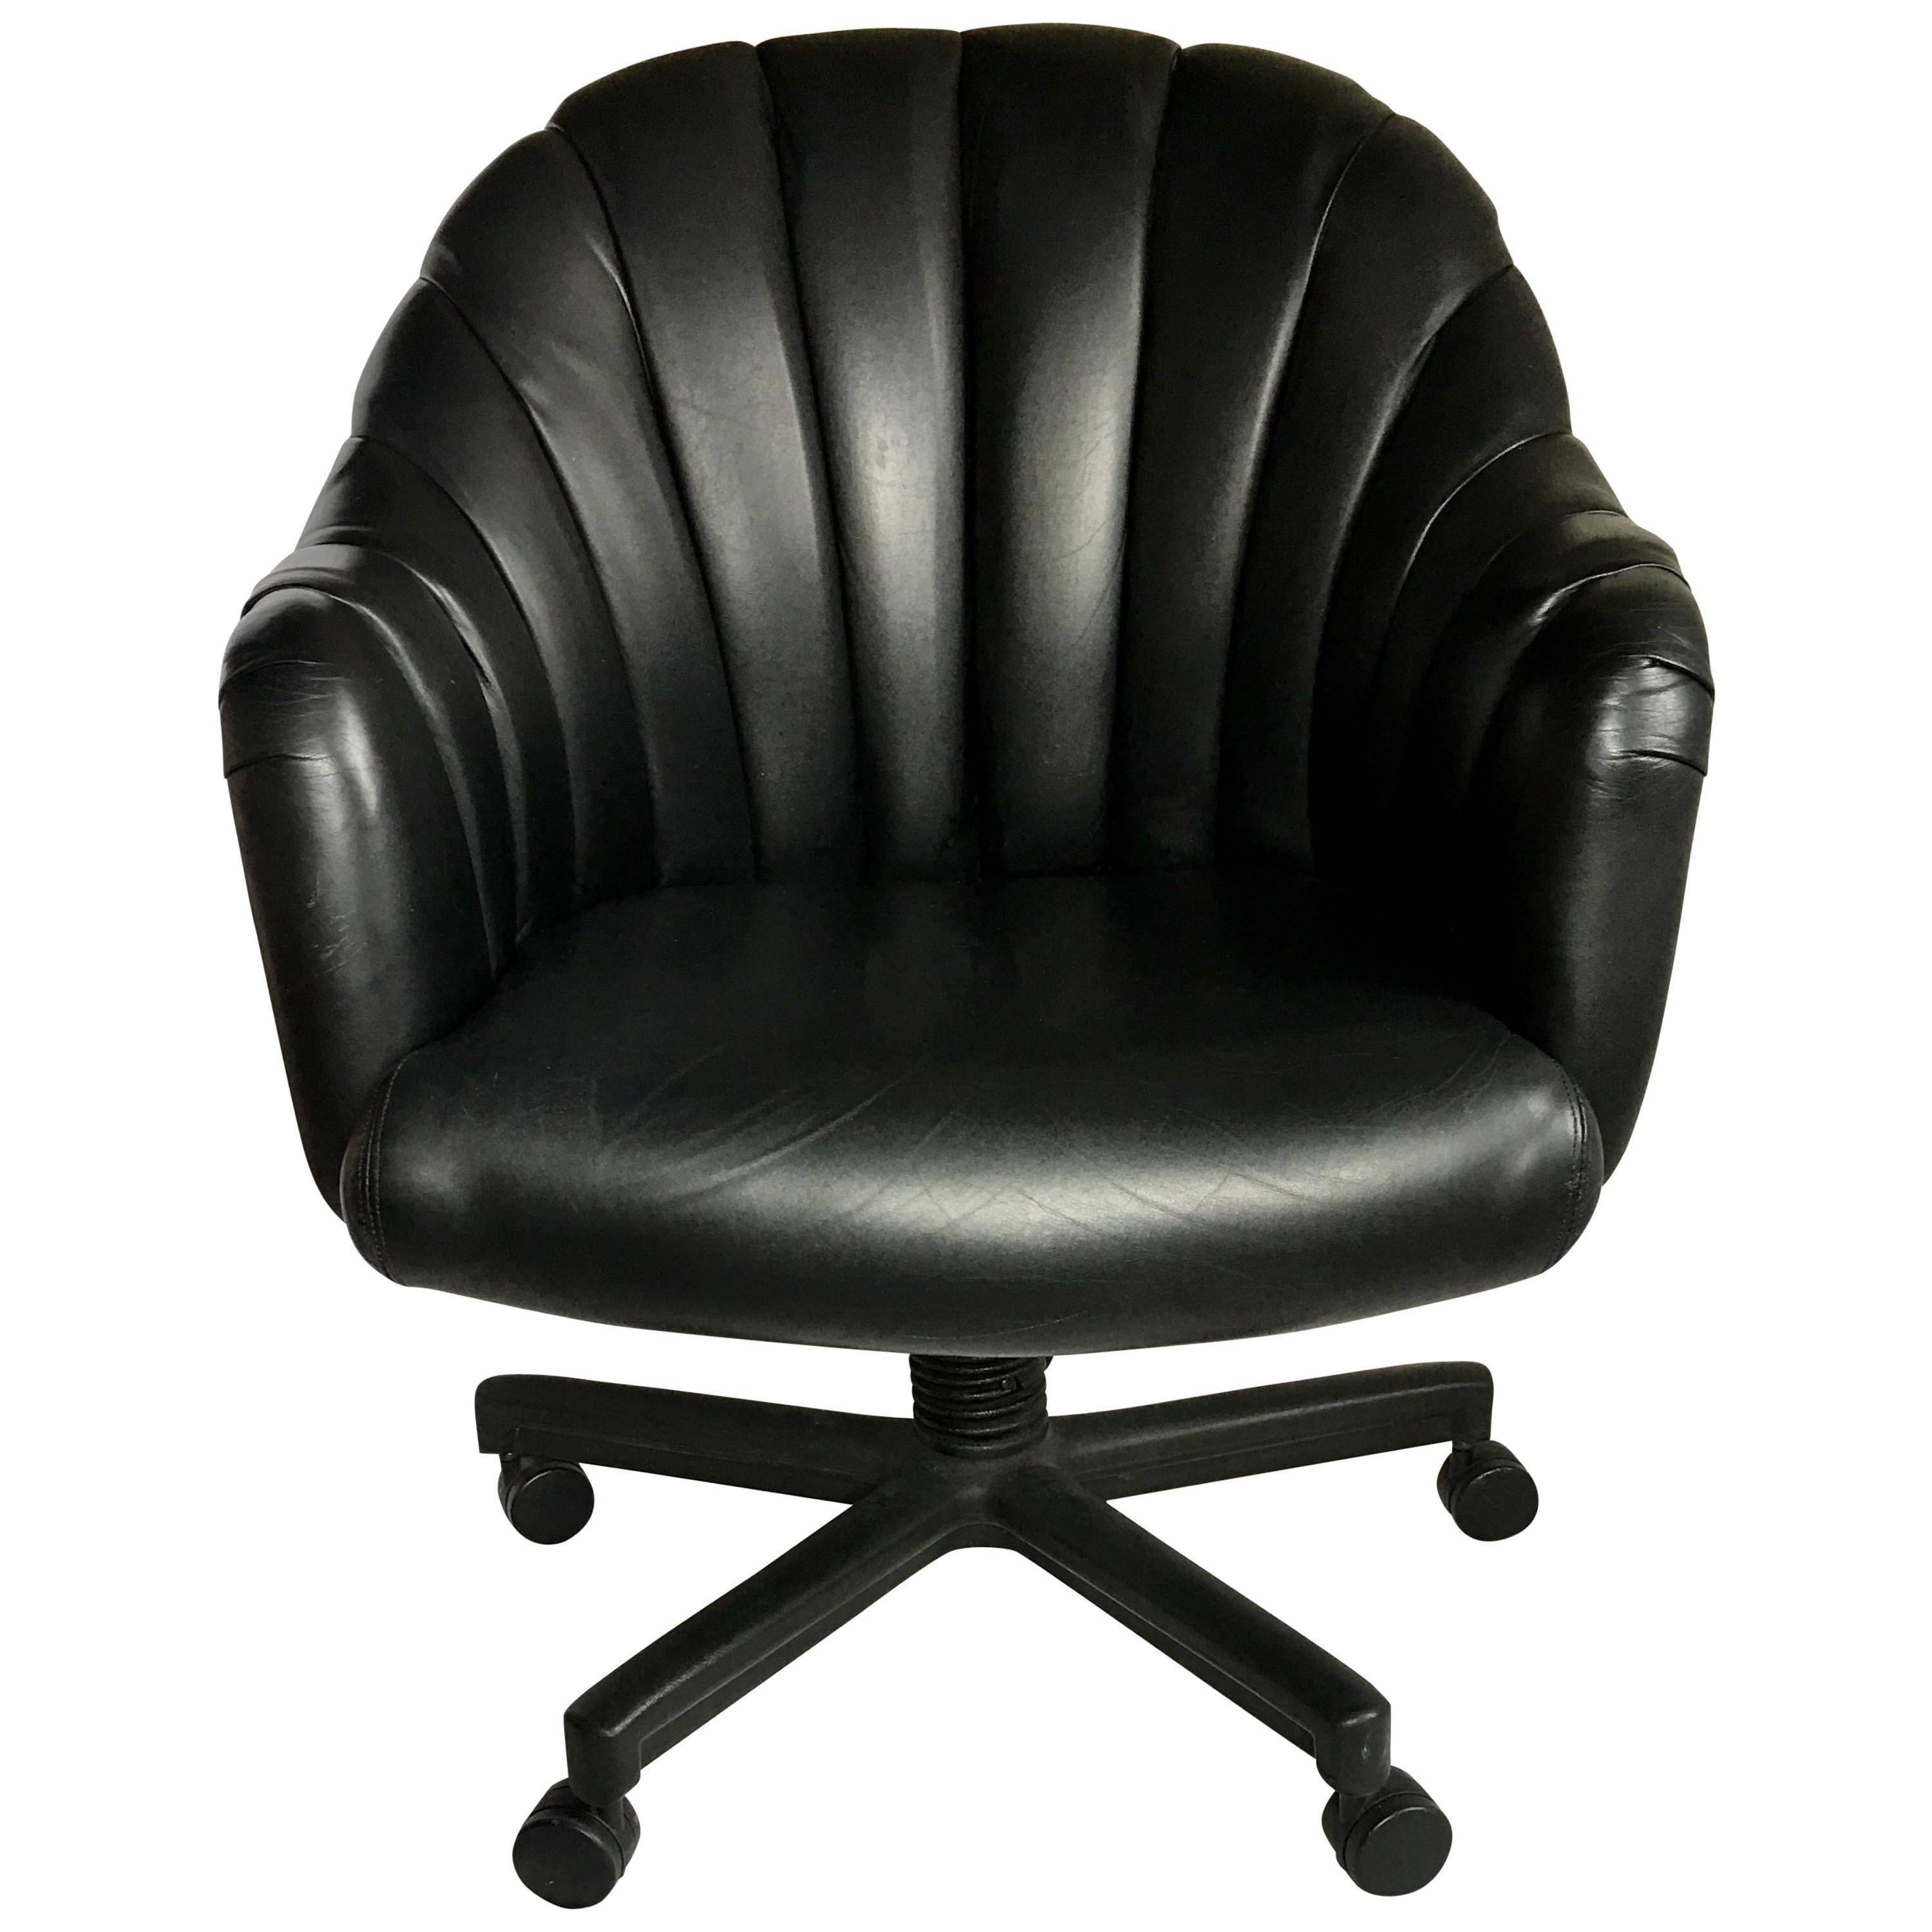 1980s Hollywood Regency Style Channel Leather Swivel Desk Chair, Jack Cartwright For Sale